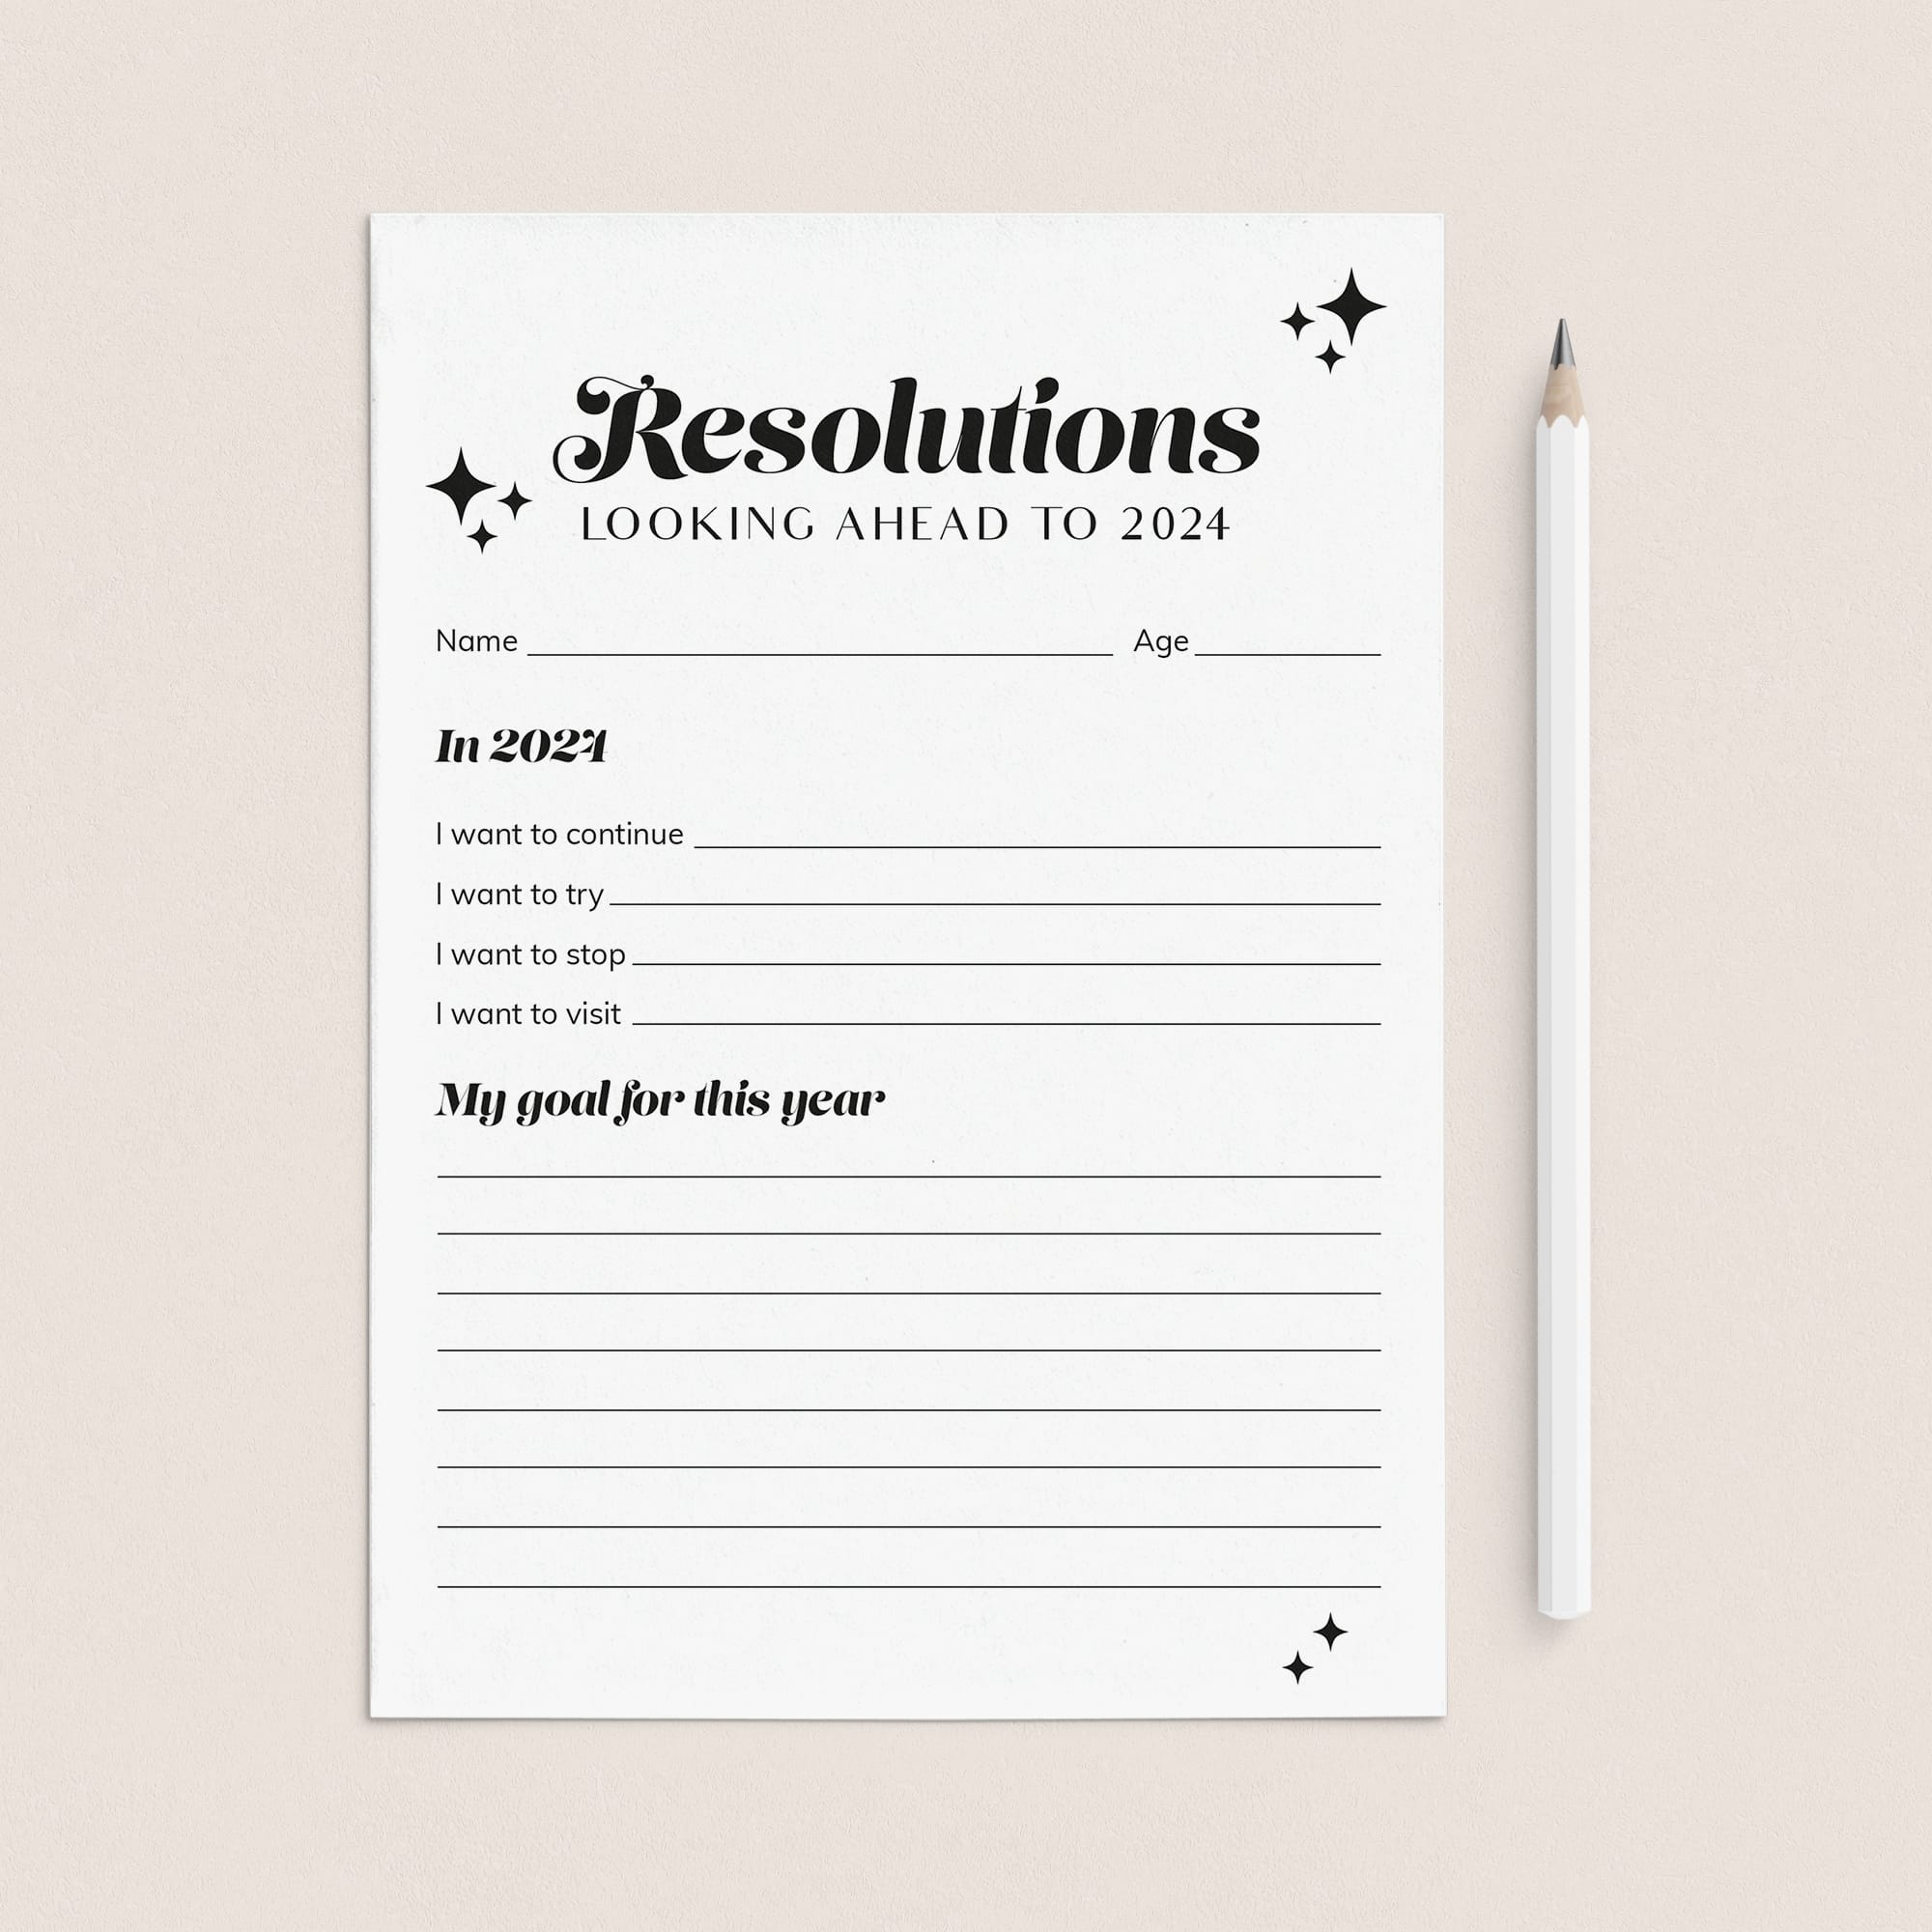 2024 New Year Resolutions Goal Setting List Printable by LittleSizzle